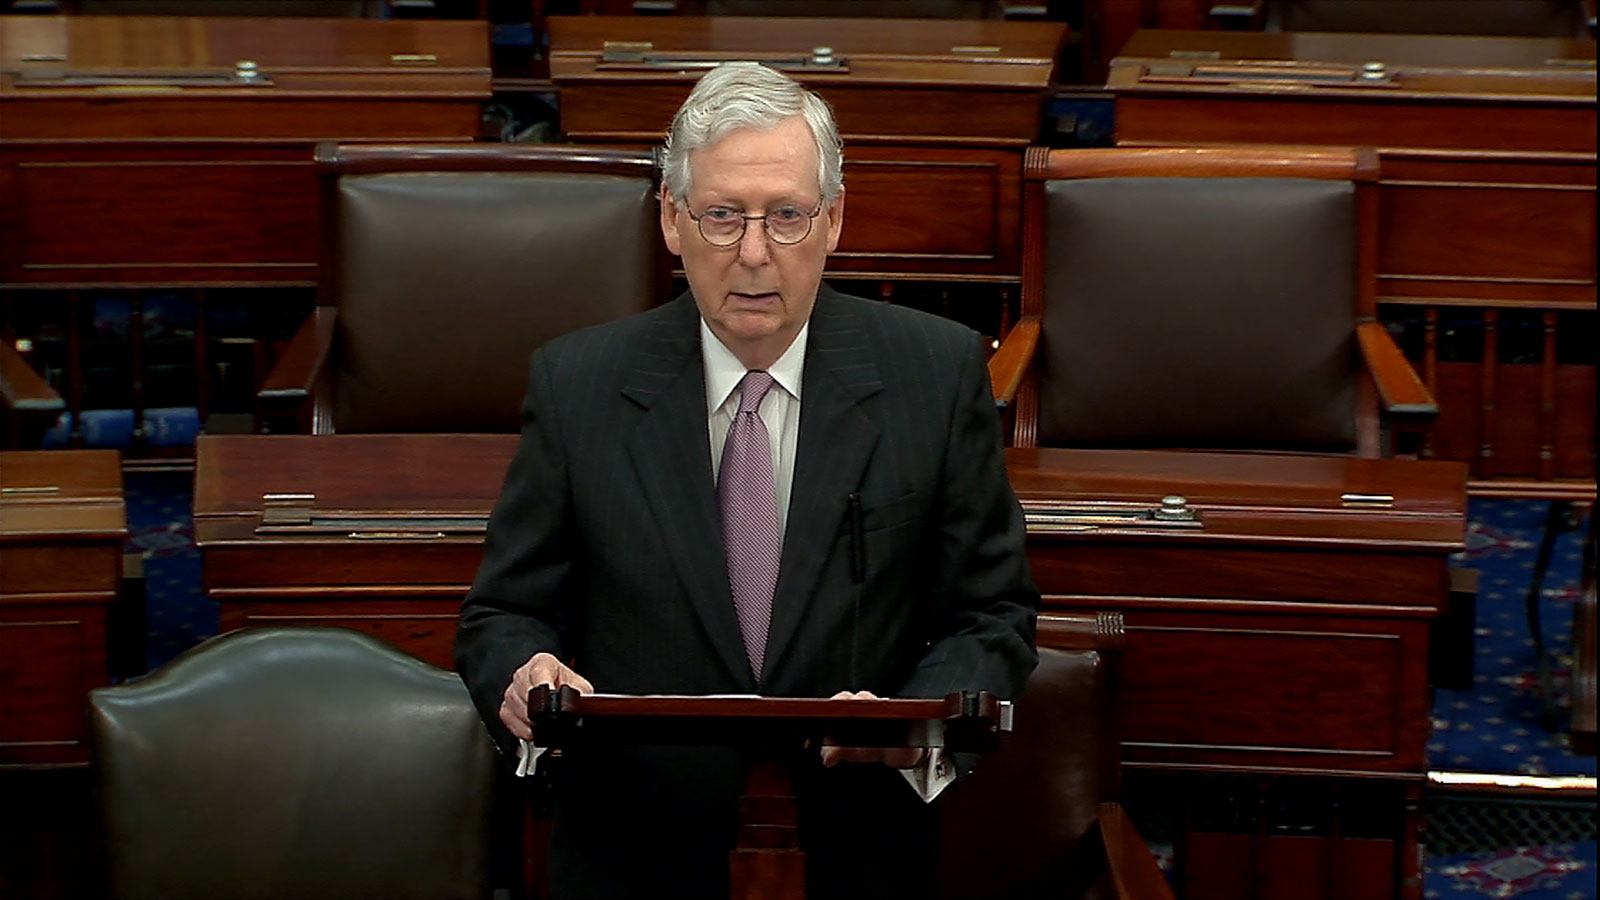 Senate Minority Leader Mitch McConnell delivers remarks from the Senate floor on Thursday.